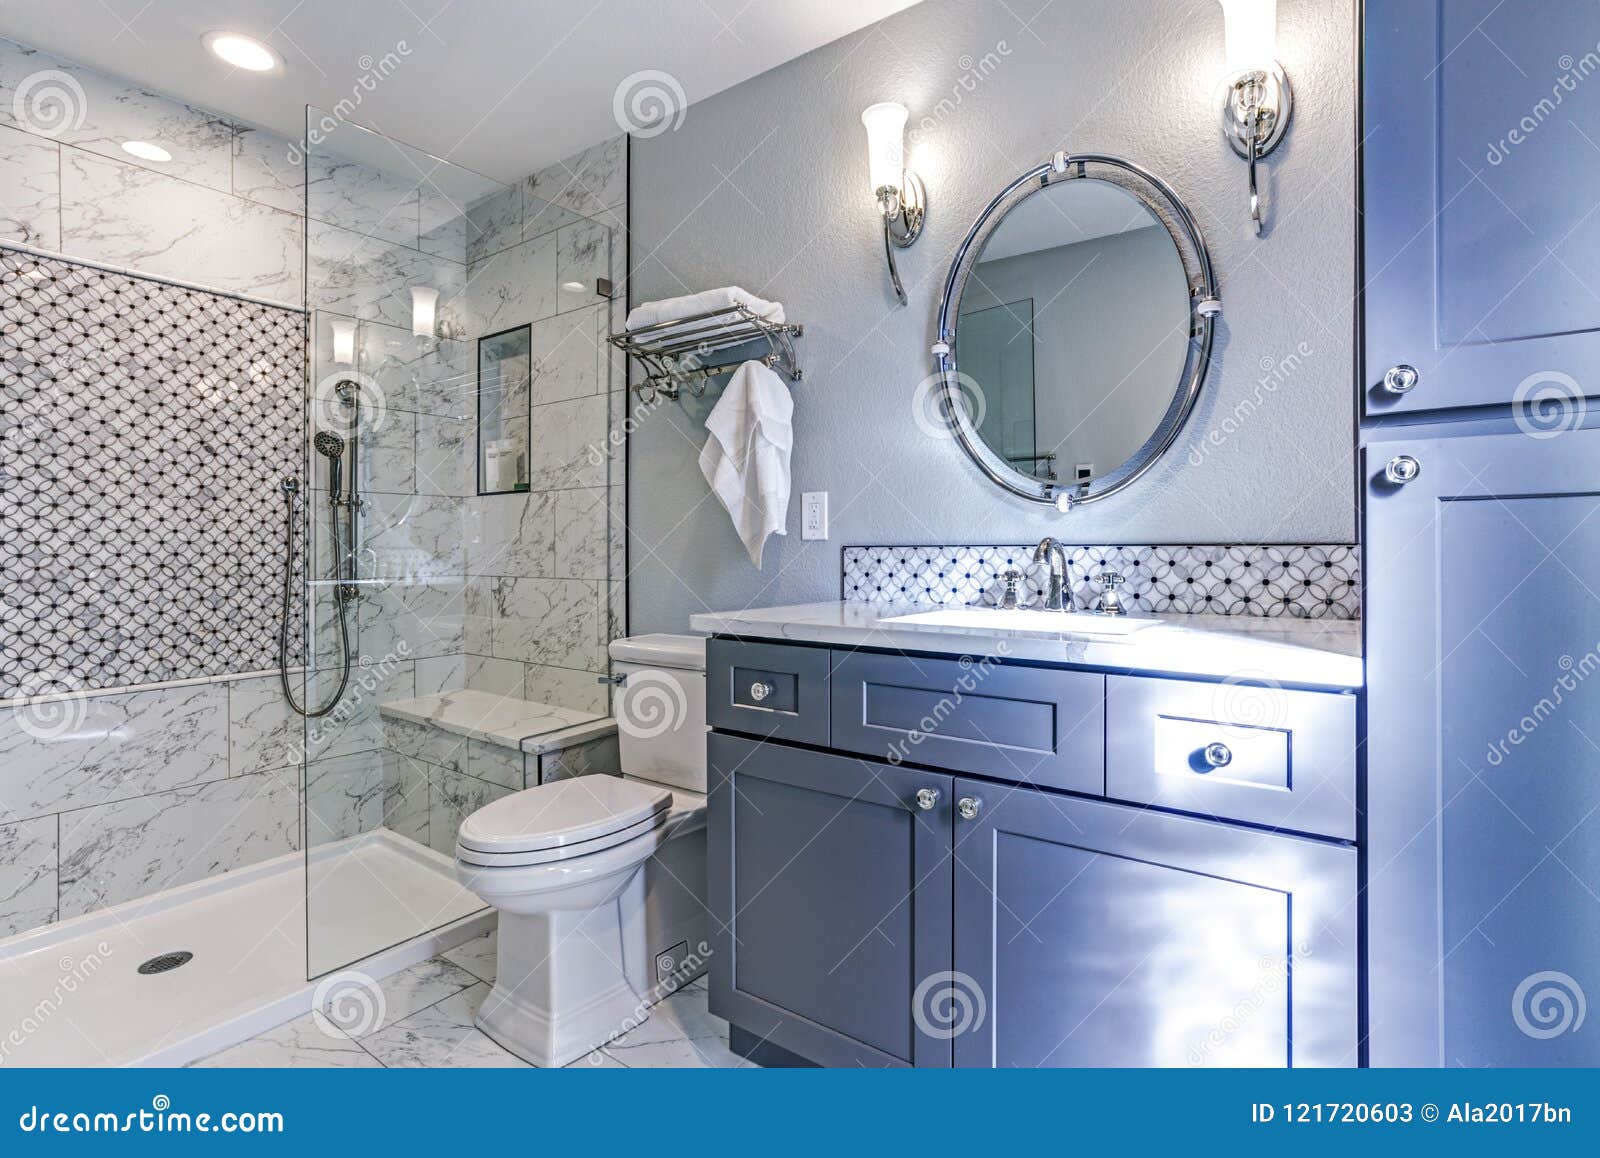 new blue bathroom  with marble shower surround